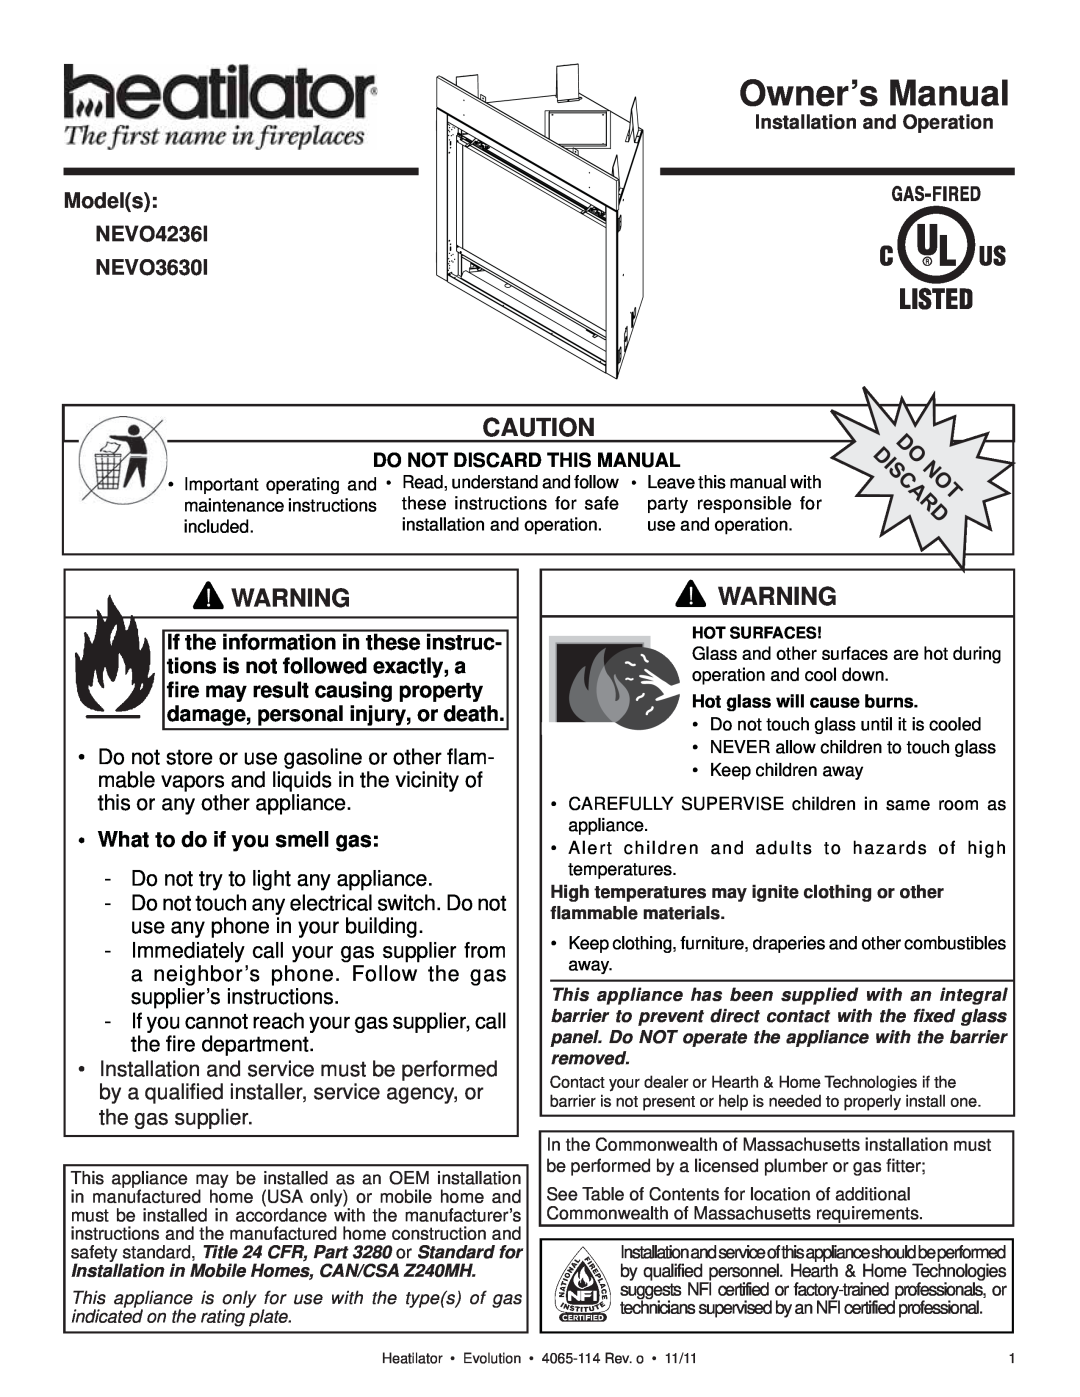 Heatiator owner manual Models NEVO4236I NEVO3630I, •What to do if you smell gas, Owner’s Manual 